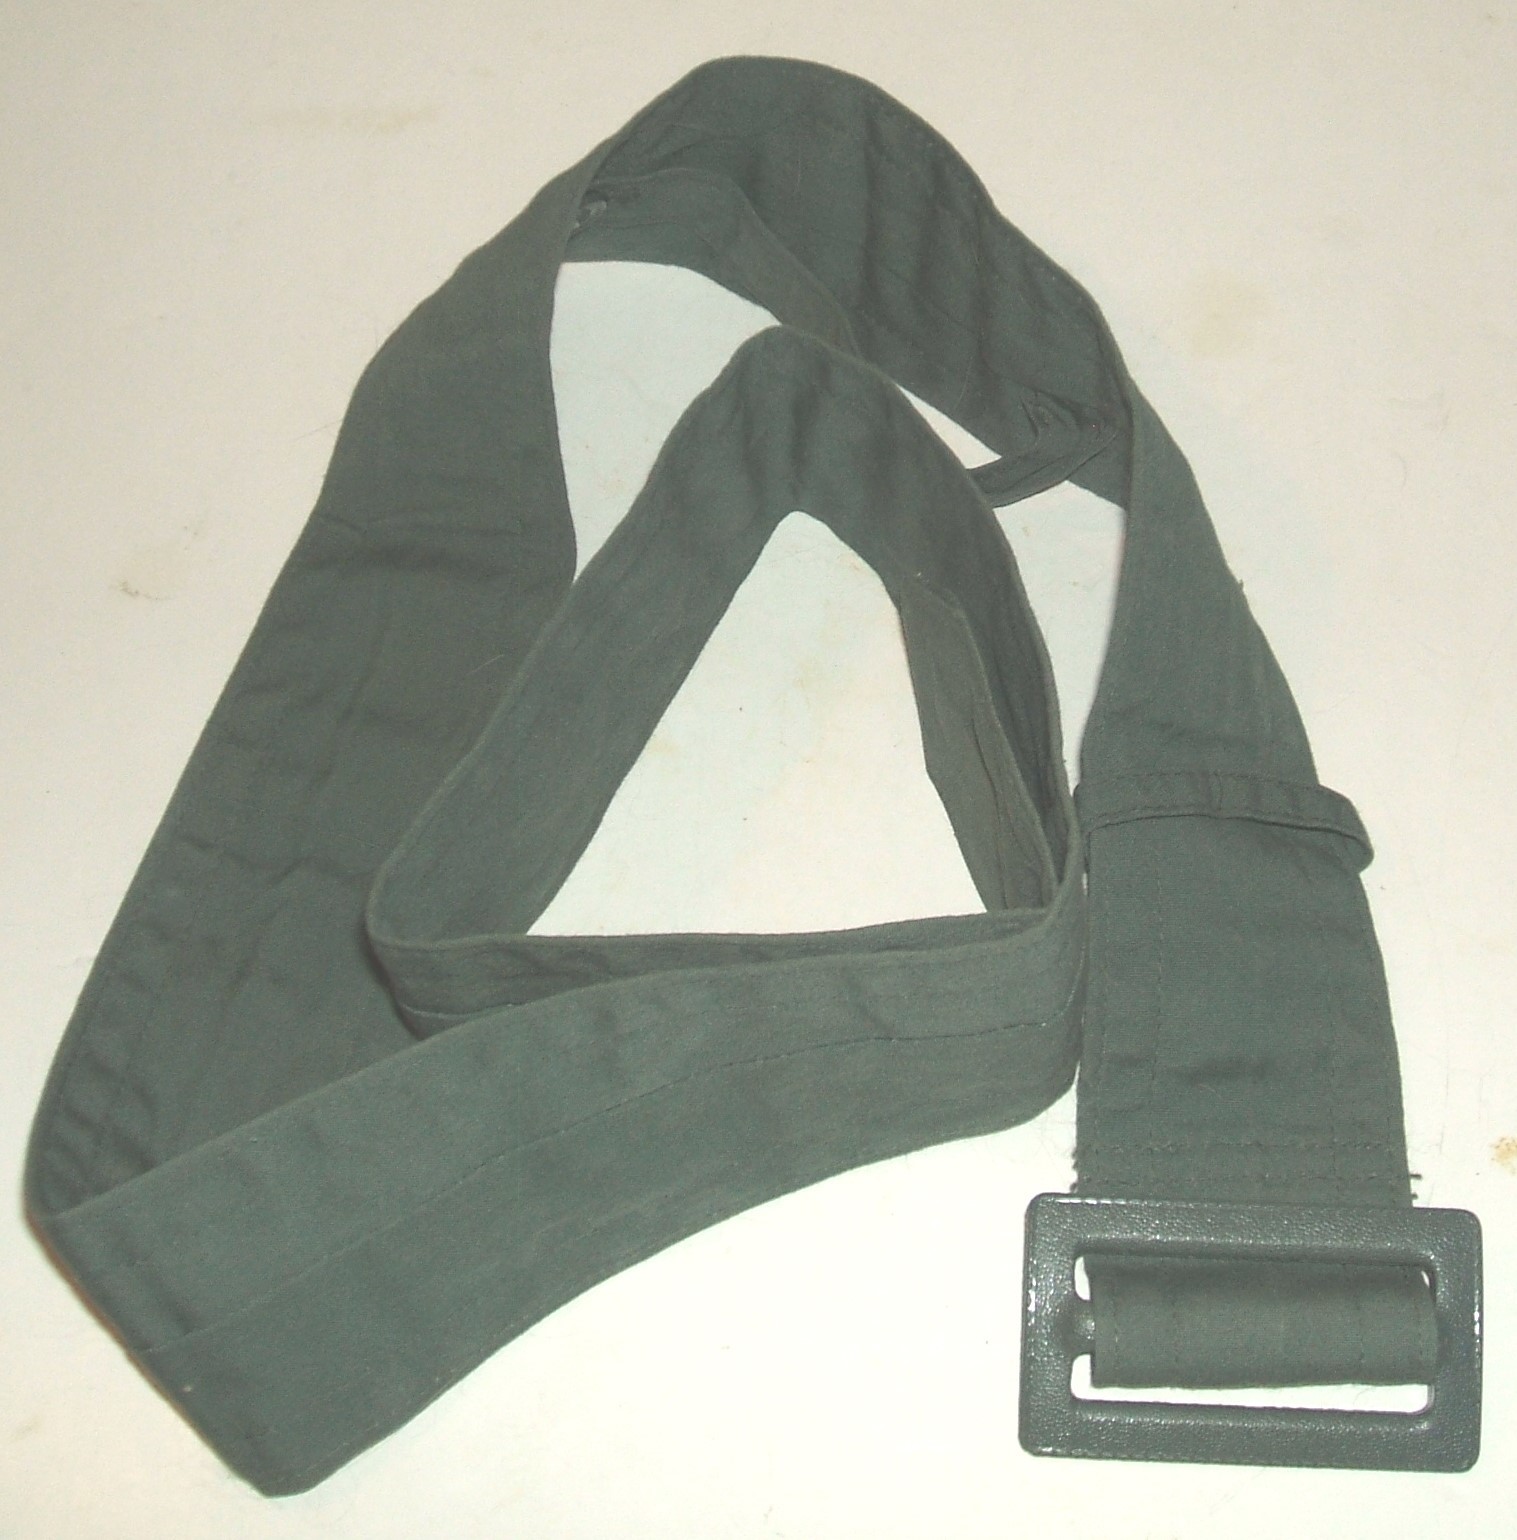 Primary image for Waistbelt waist belt for US Army raincoat AG Army Green -274; 42-inch X 2-1/4